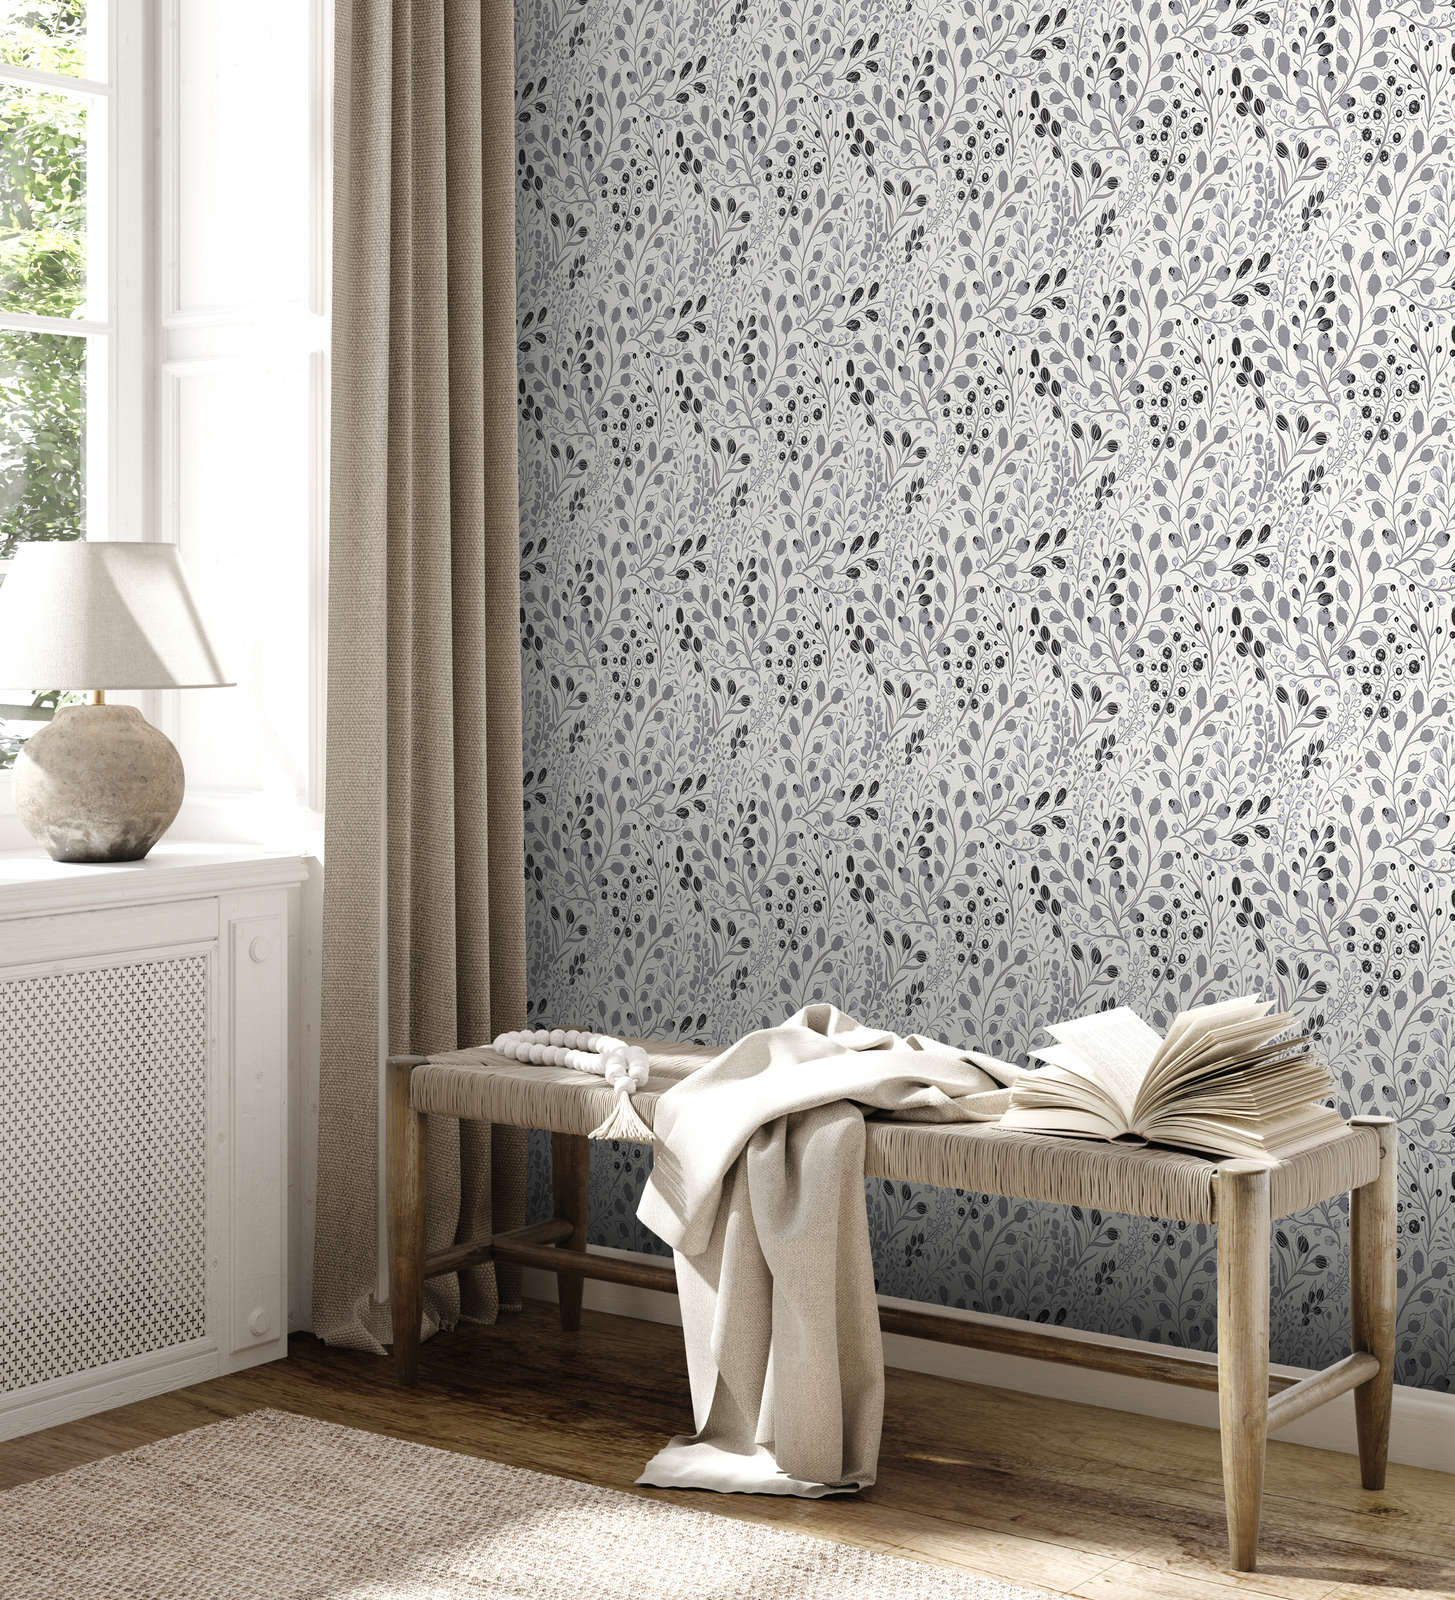             Abstract floral wallpaper in drawing style matt - grey, white, black
        